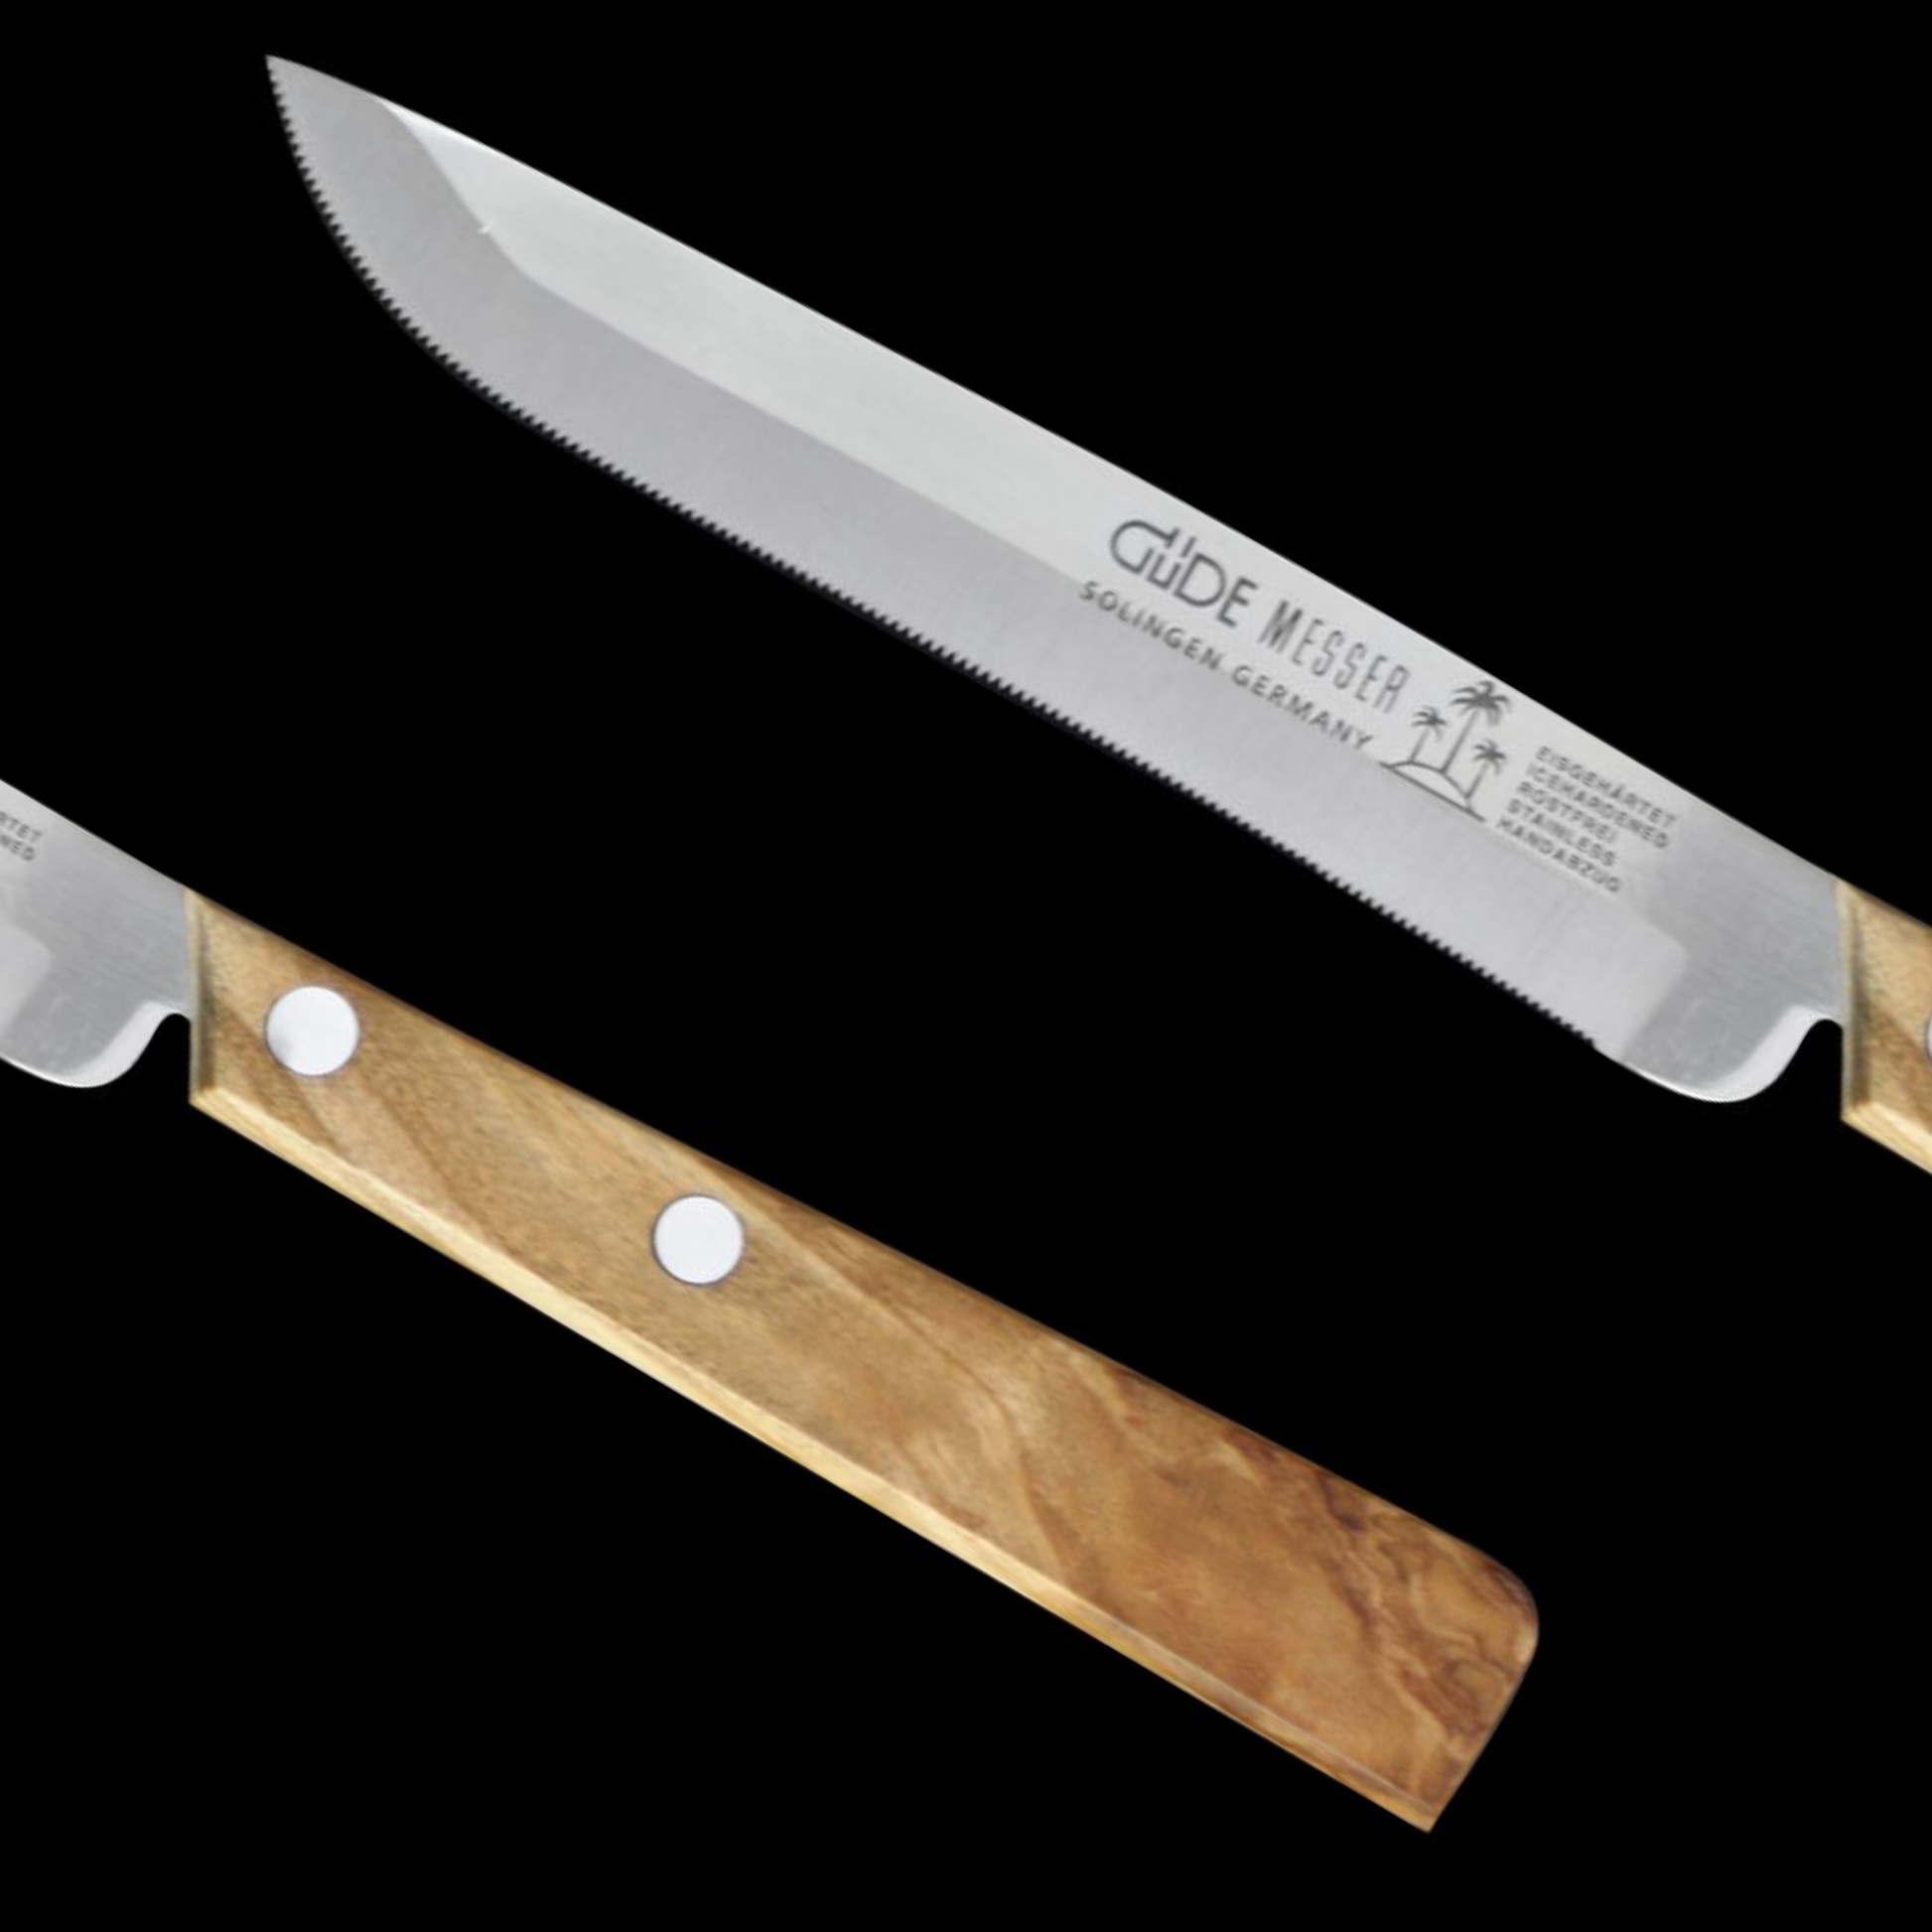 Gude Universal Knife Series 4", Olive Wood Handle - GuedeUSA